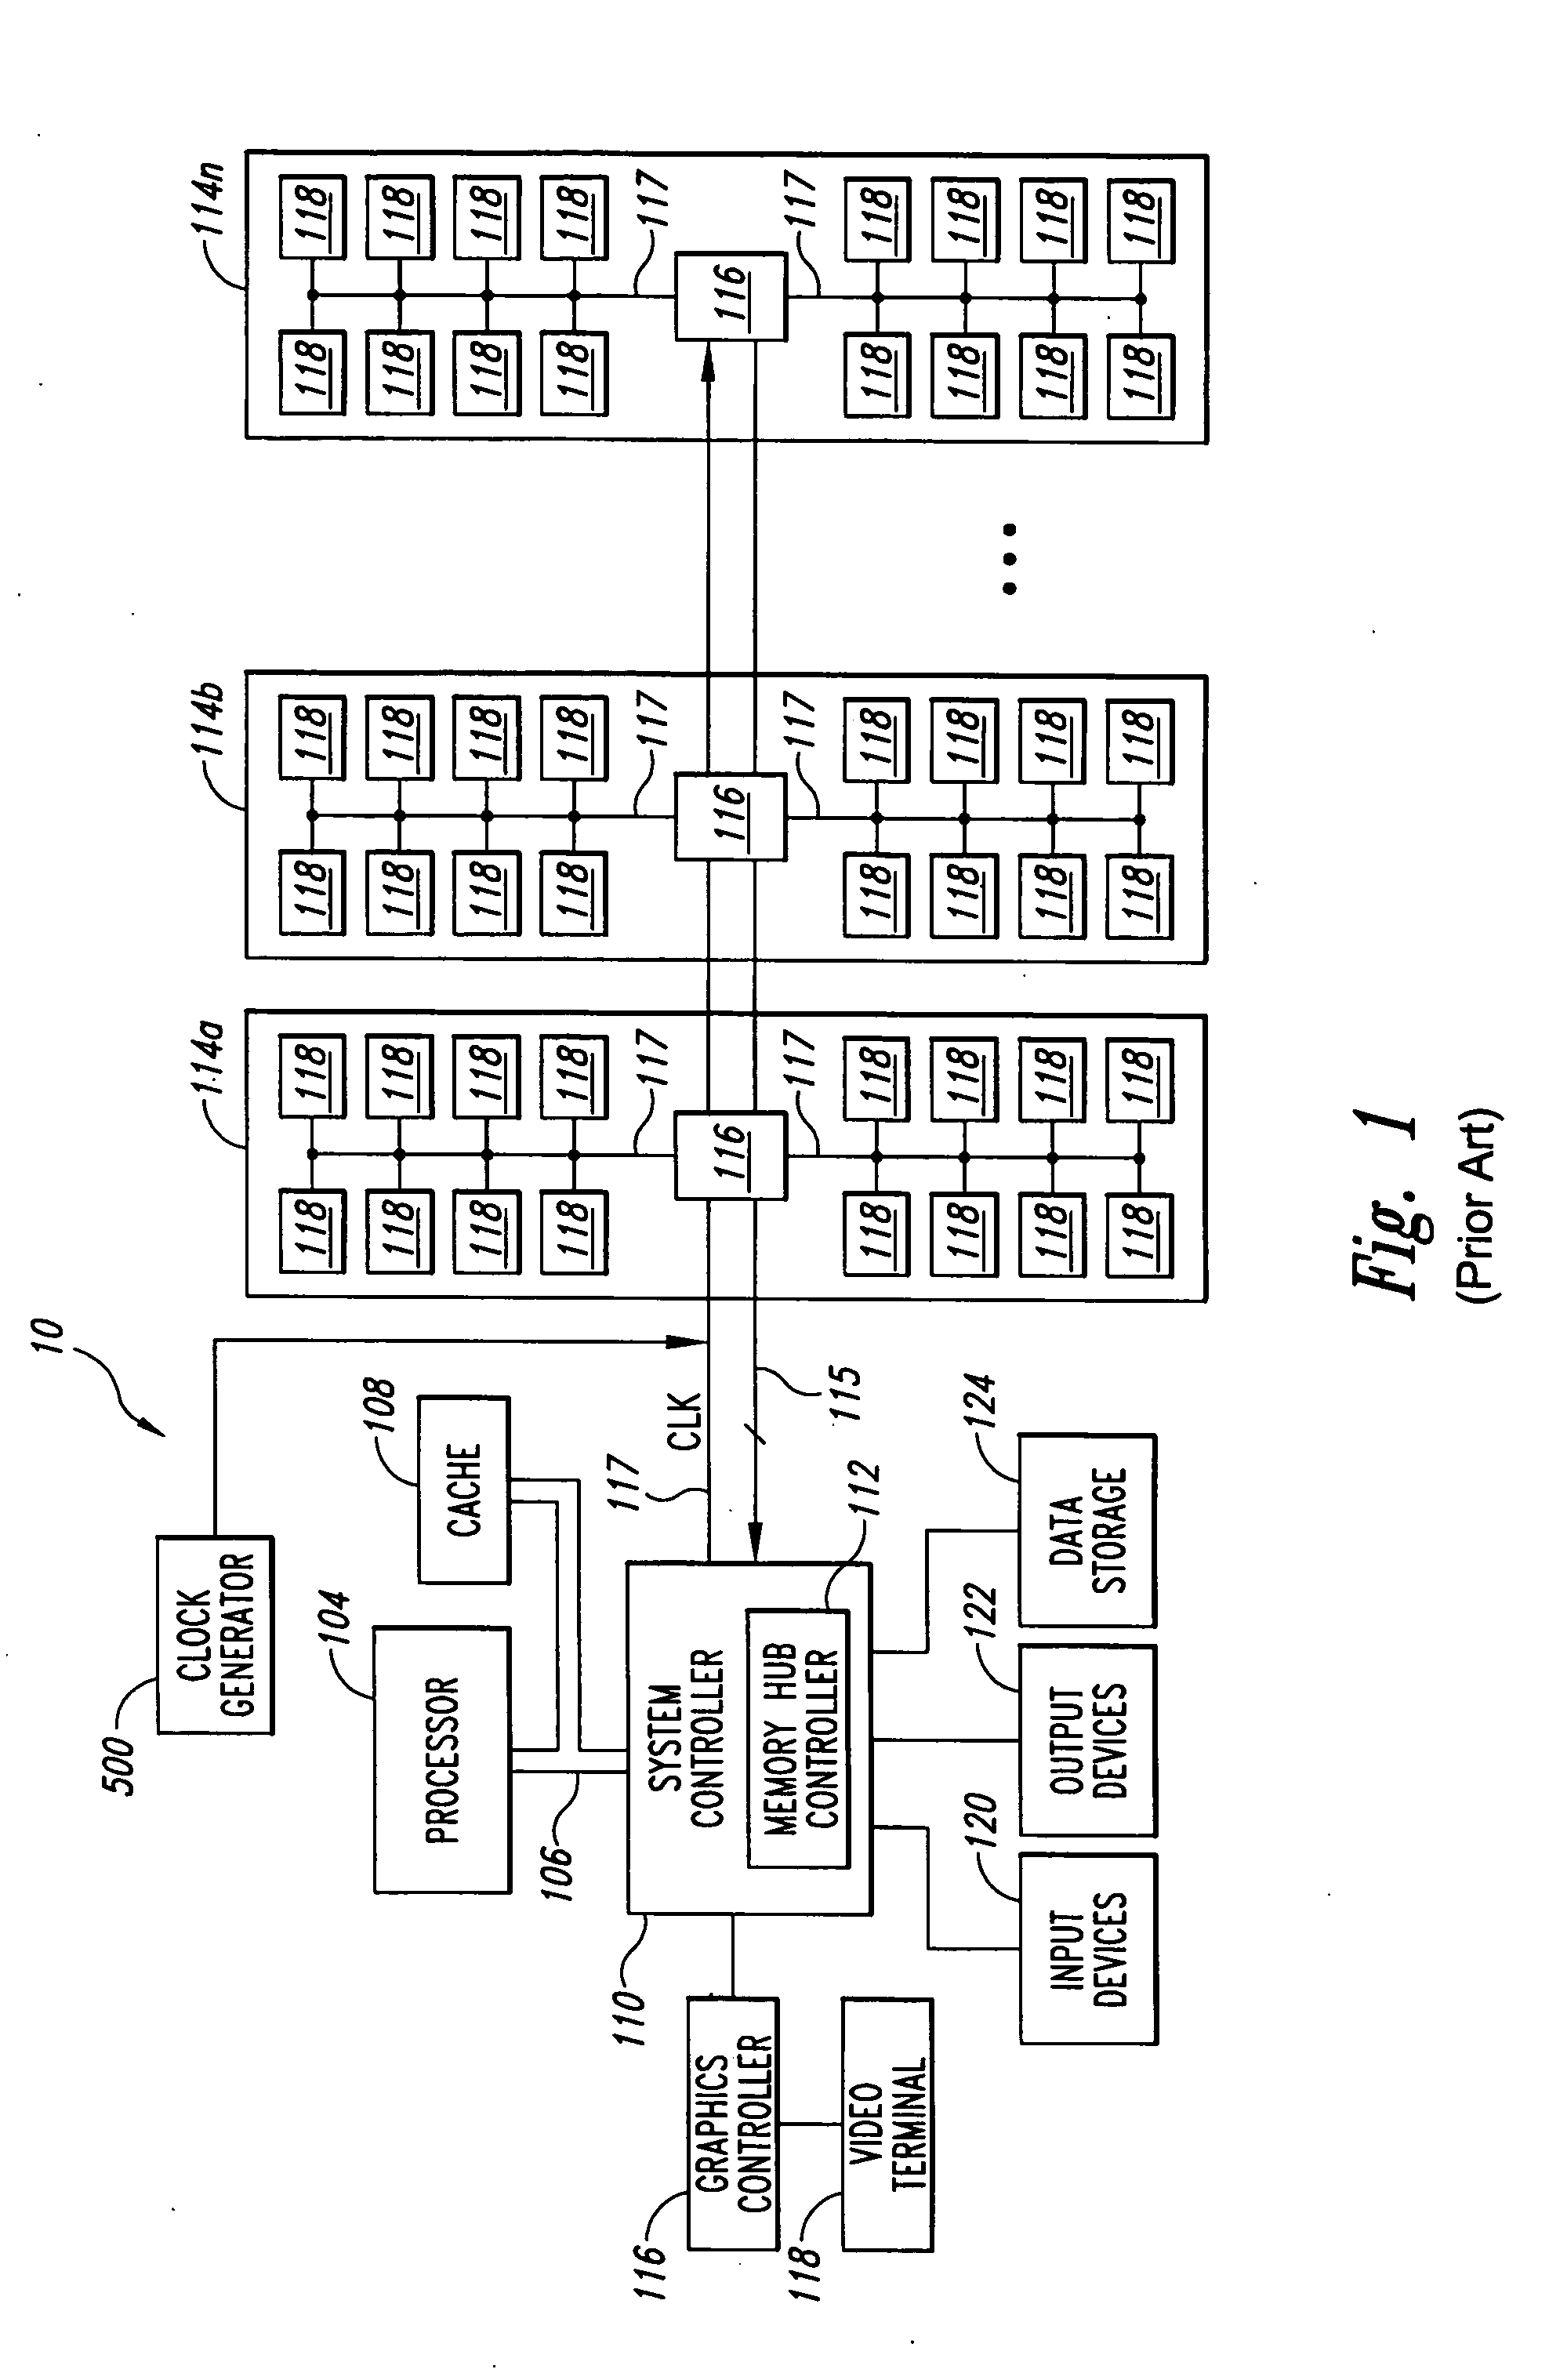 System and method for using a learning sequence to establish communications on a high- speed nonsynchronous interface in the absence of clock forwarding